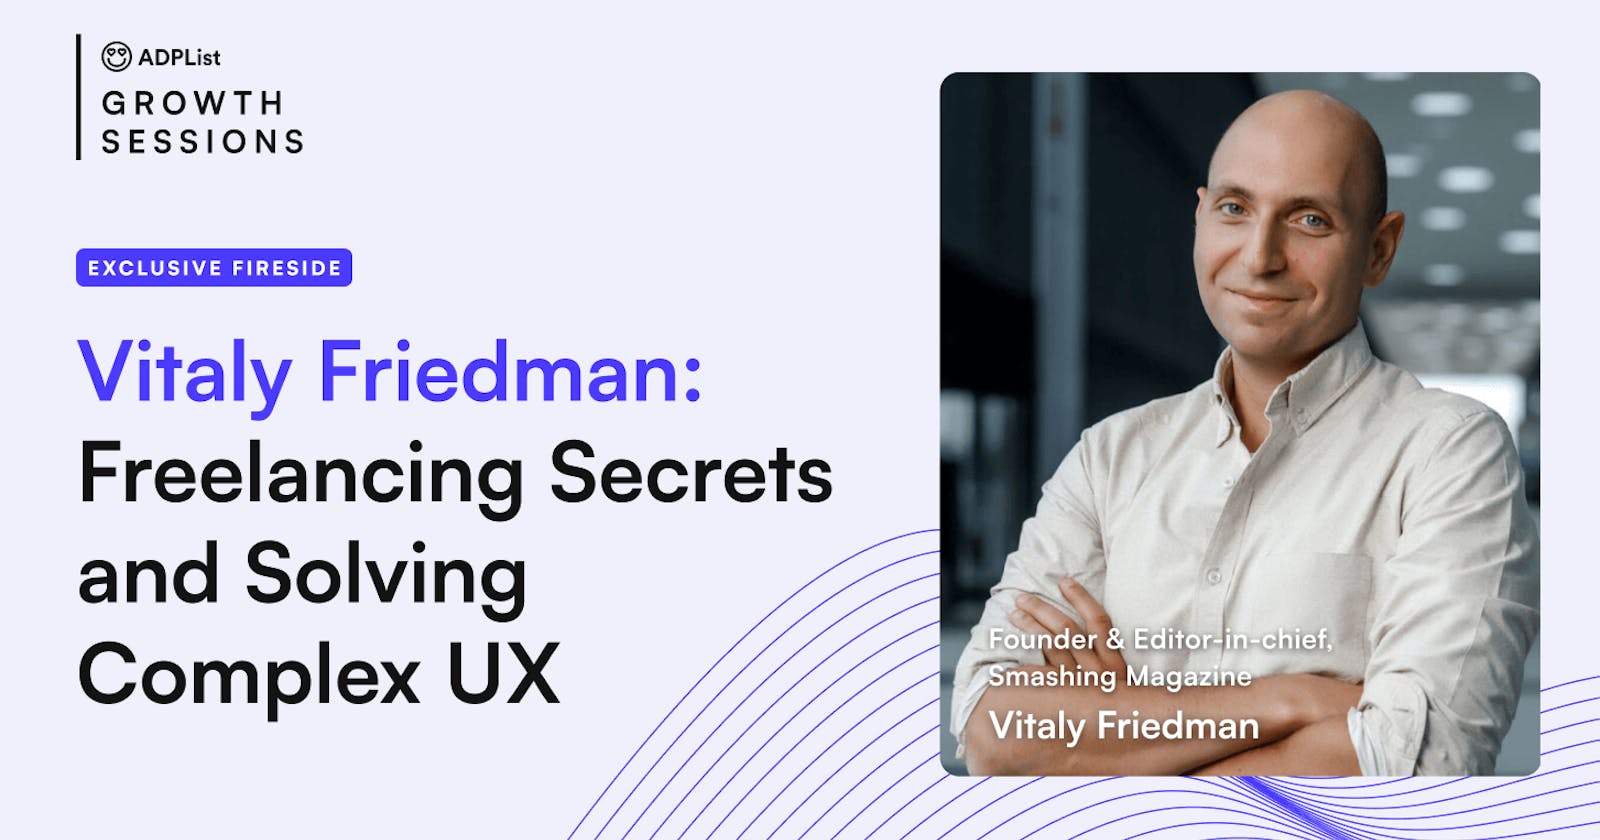 Day 29/100: Vitaly Friedman's Strategic Mastery in Design KPIs, Design SOW, and Social Equity